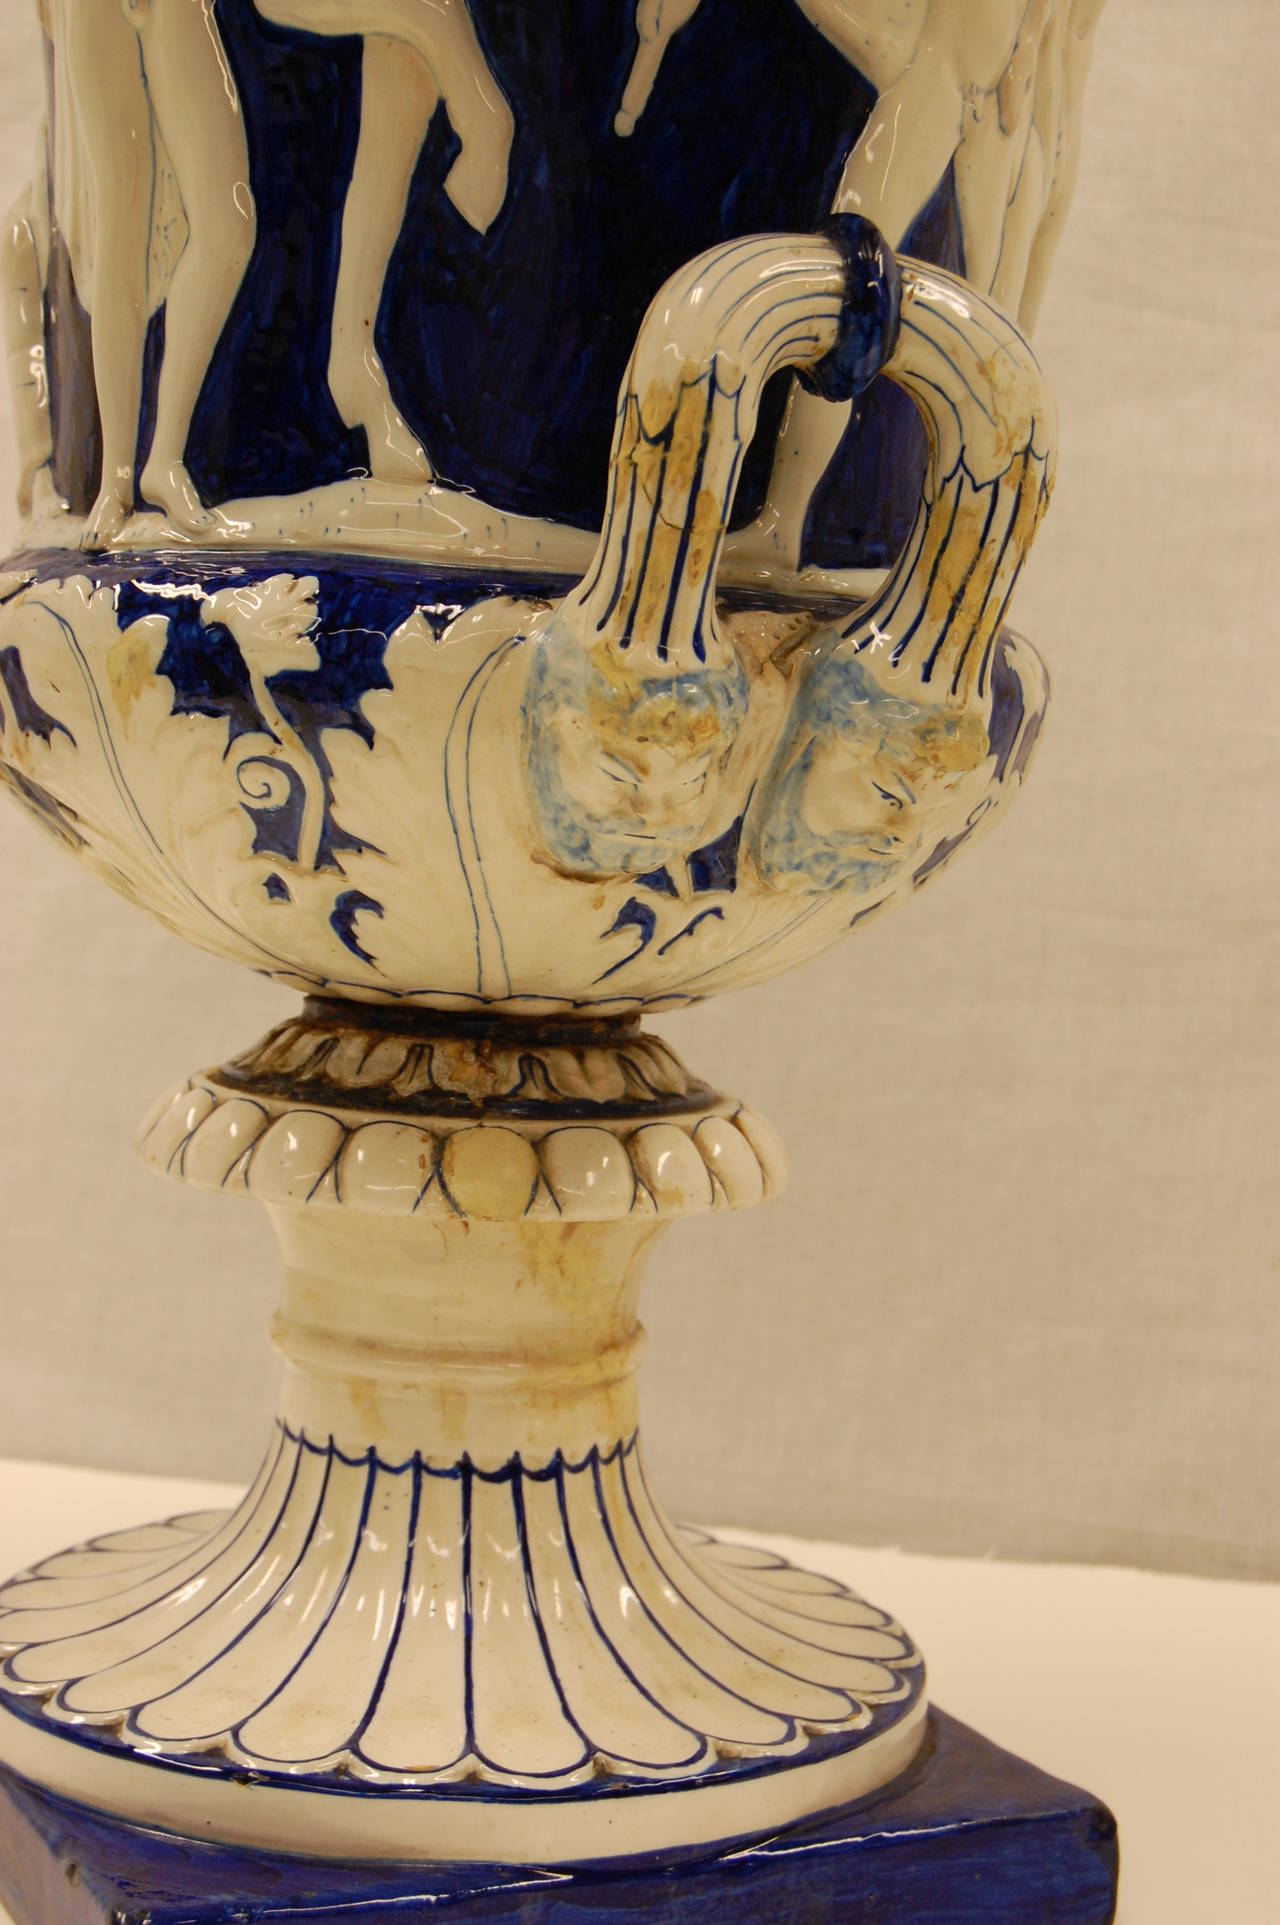 Terracotta Antique Classically Inspired Majolica Urn in a Blue and White Glazed Finish For Sale